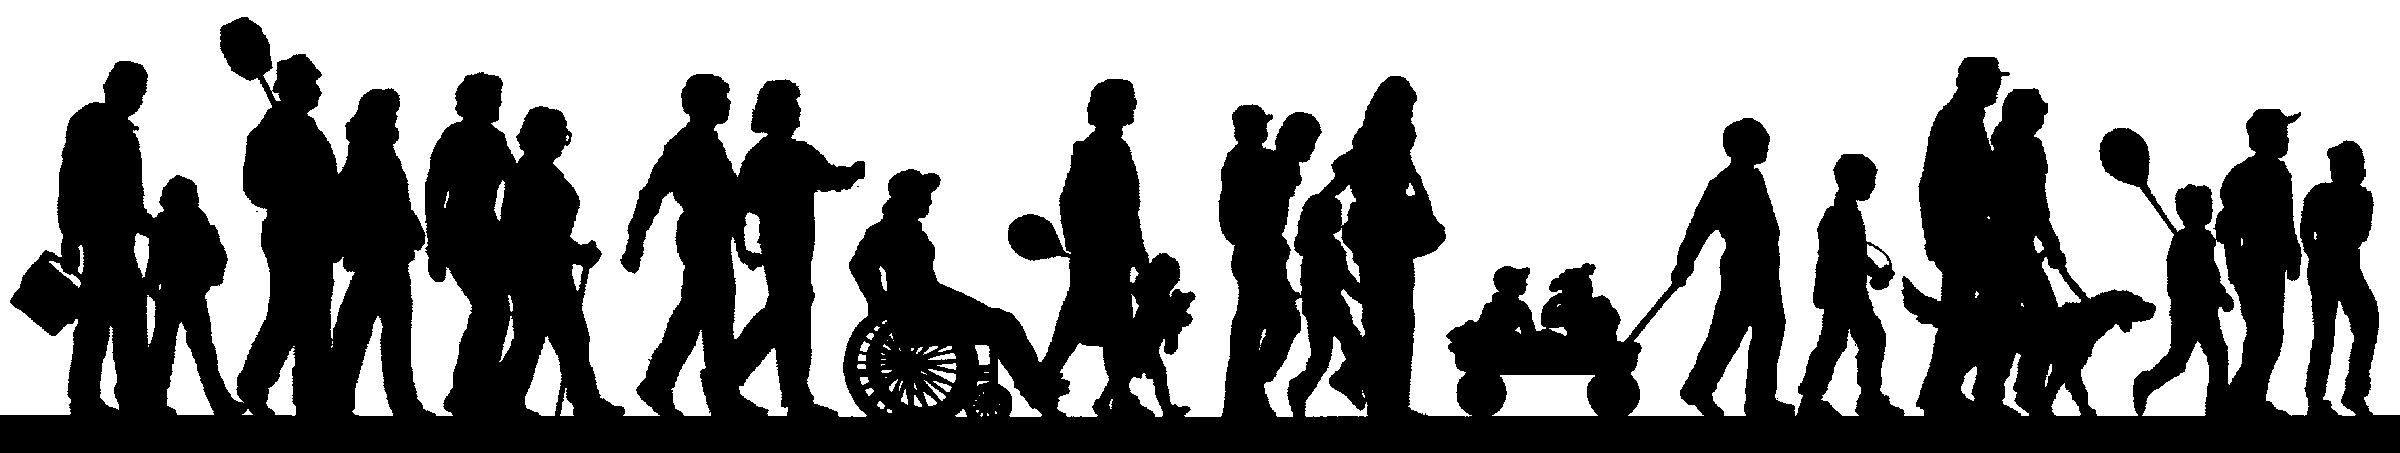 free clipart of family walking - photo #44